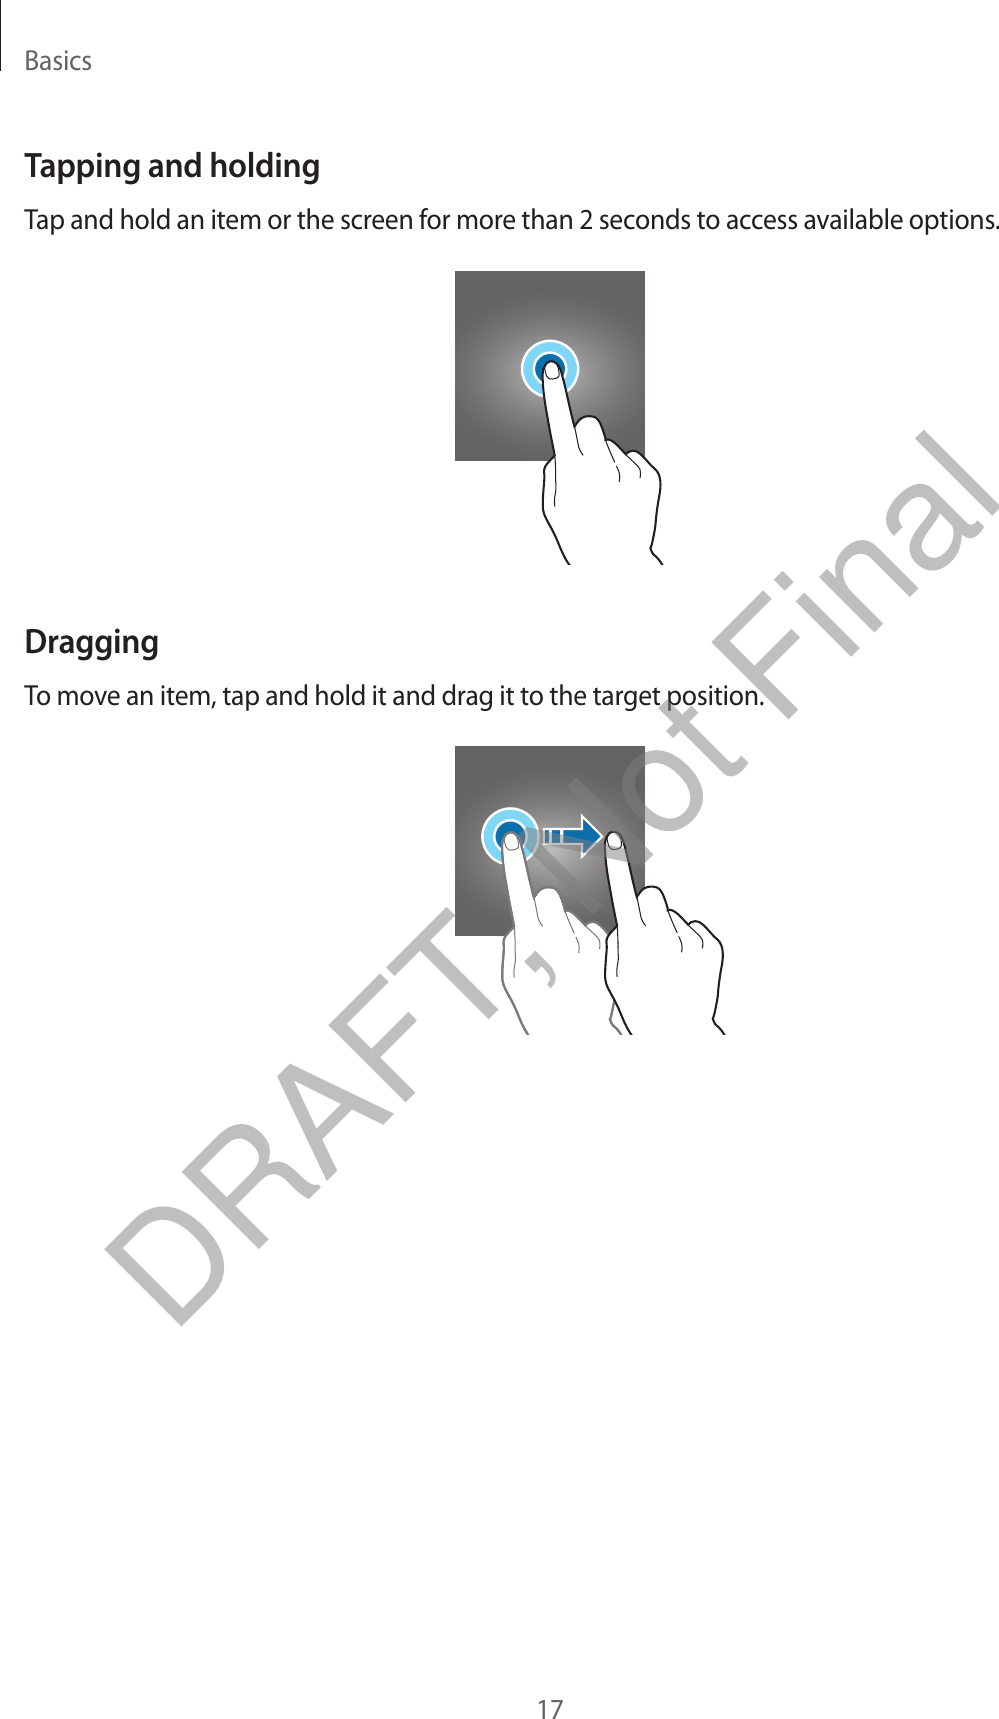 Basics17Tapping and holdingTap and hold an item or the screen for more than 2 seconds to access available options.DraggingTo move an item, tap and hold it and drag it to the target position.DRAFT, Not Final